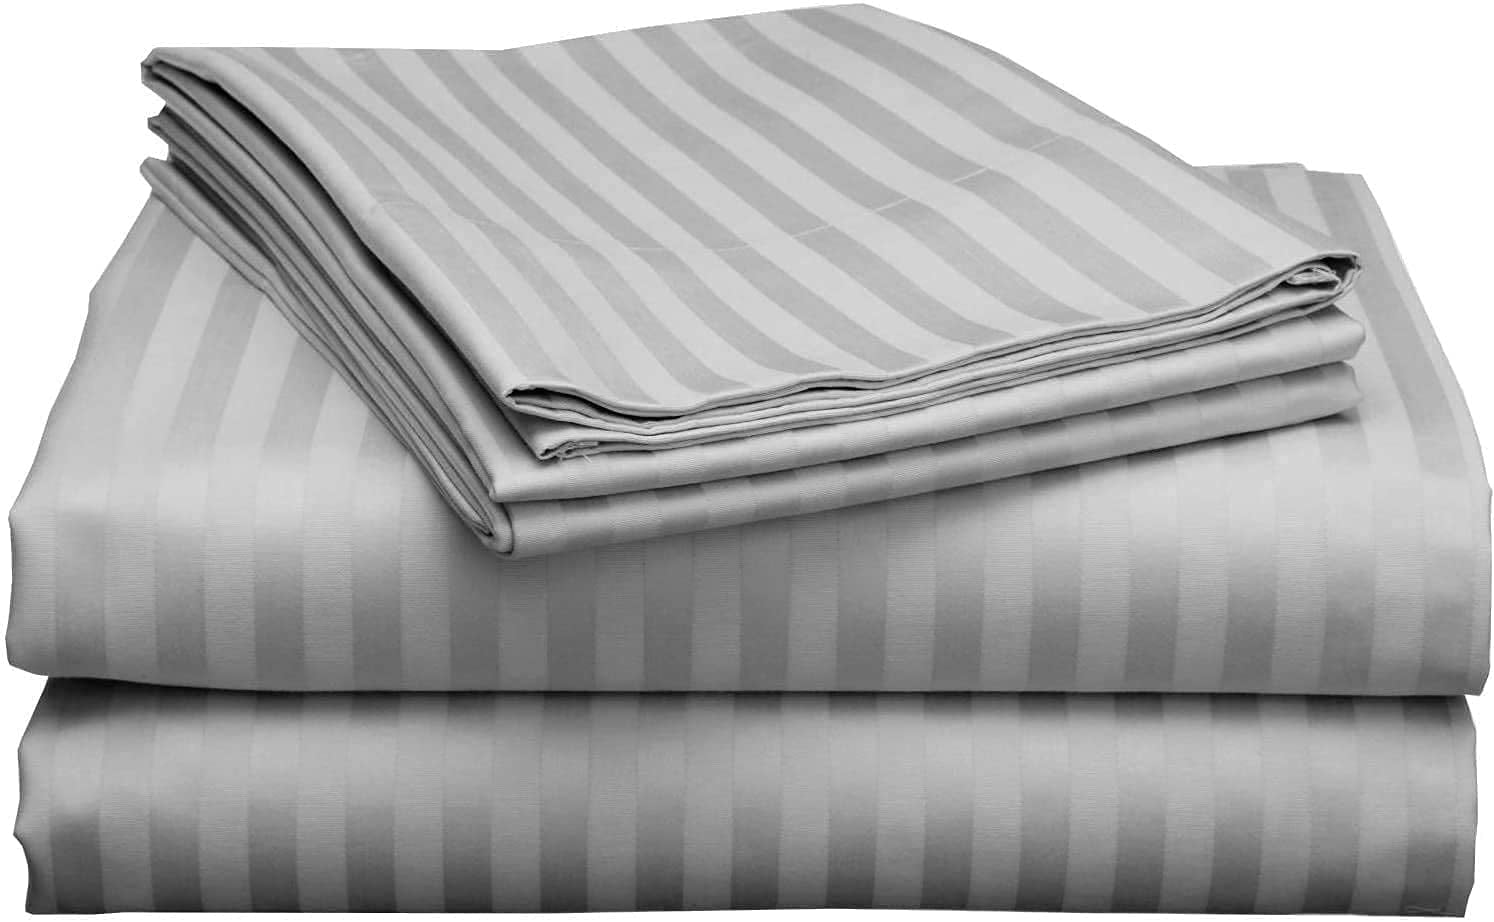 Supreme 1 PC Fitted Sheet 1000 TC Egyptian Cotton Gray Striped Queen Size